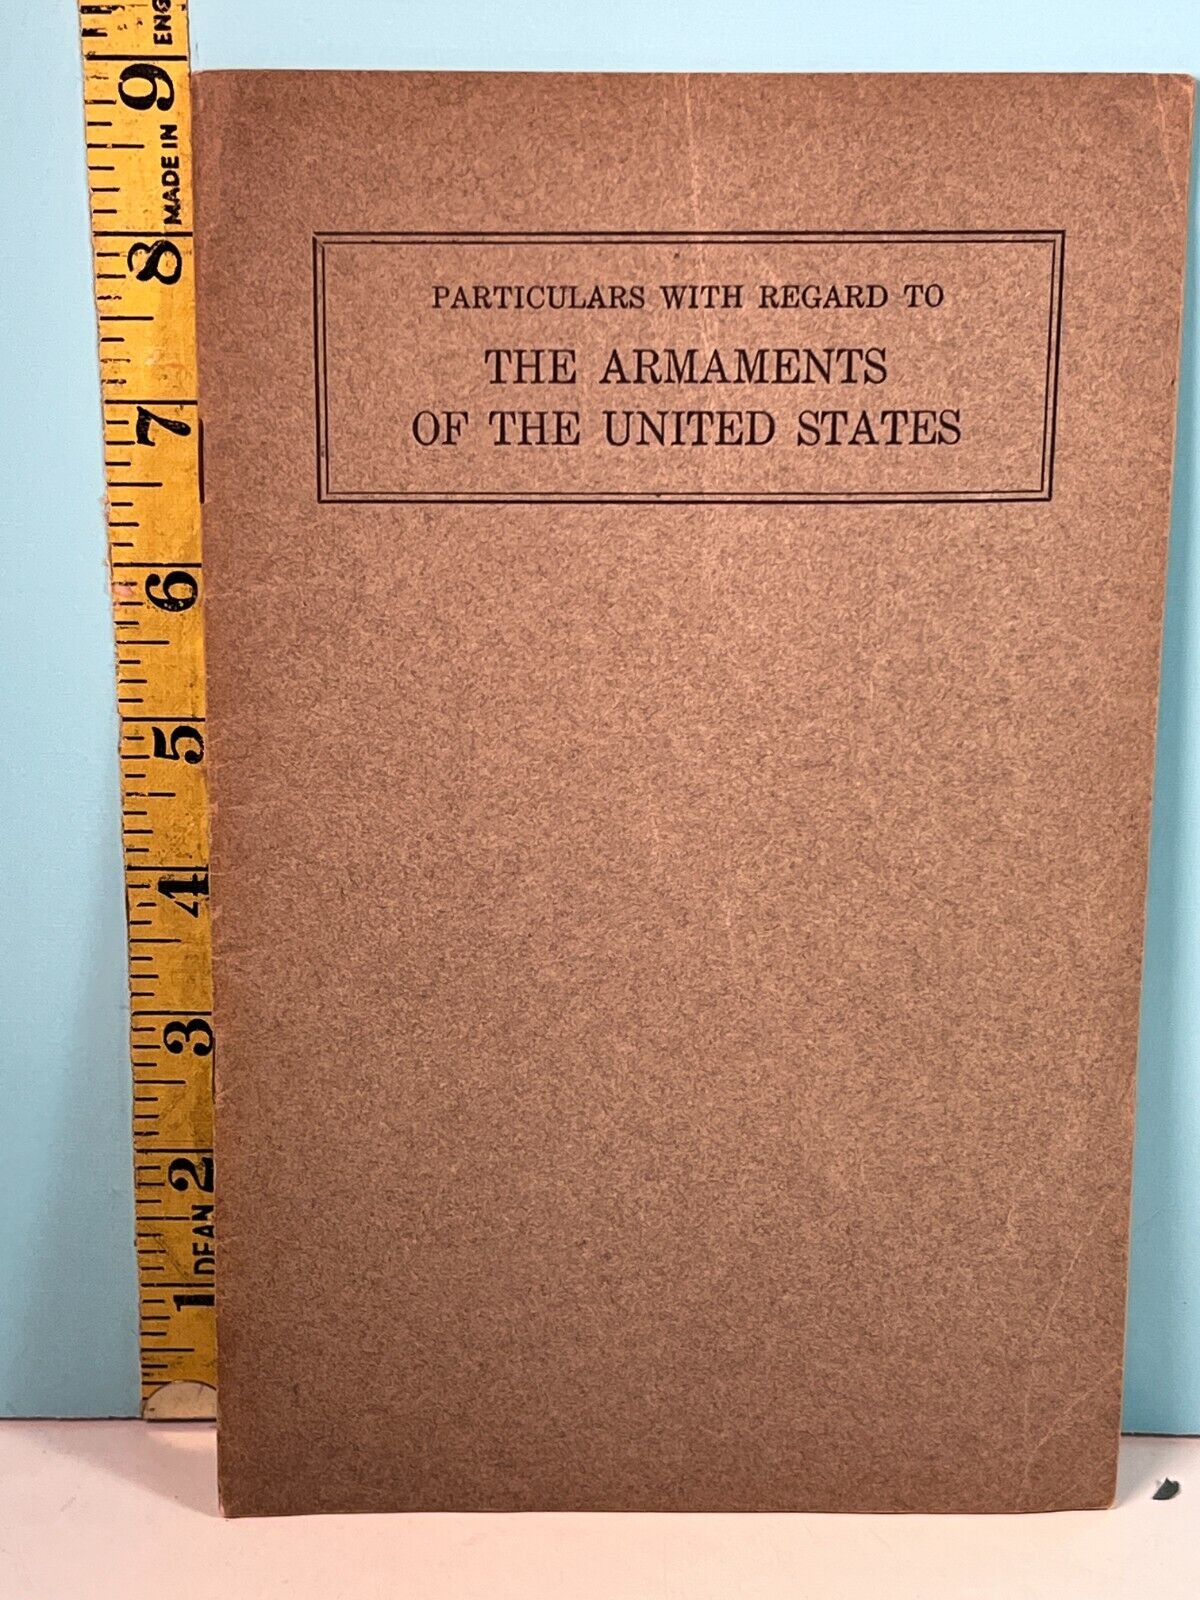 1931 Particulars w/Regard to The Armaments of the United States Dept. of State🔥